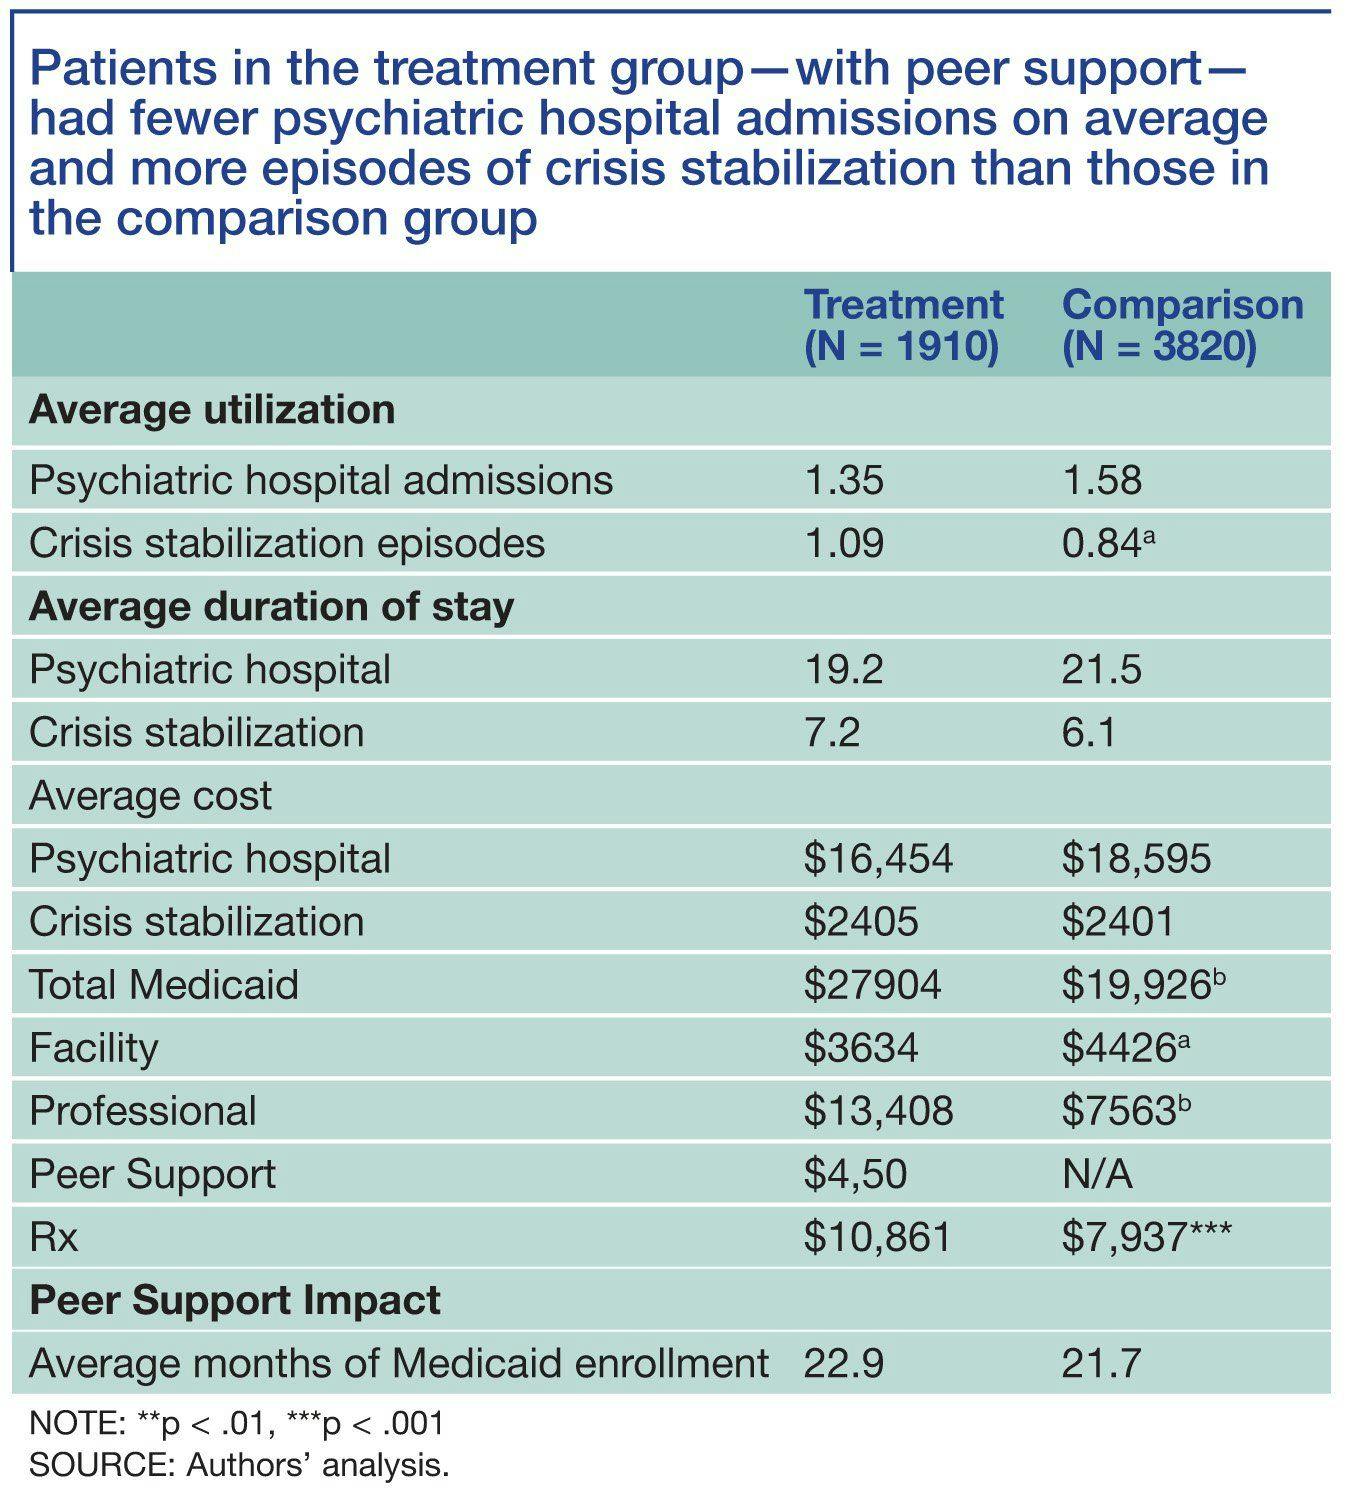 Patients in the treatment group—with peer support— had fewer psychiatric hospital admissions on average and more episodes of crisis stabilization than those in the comparison group